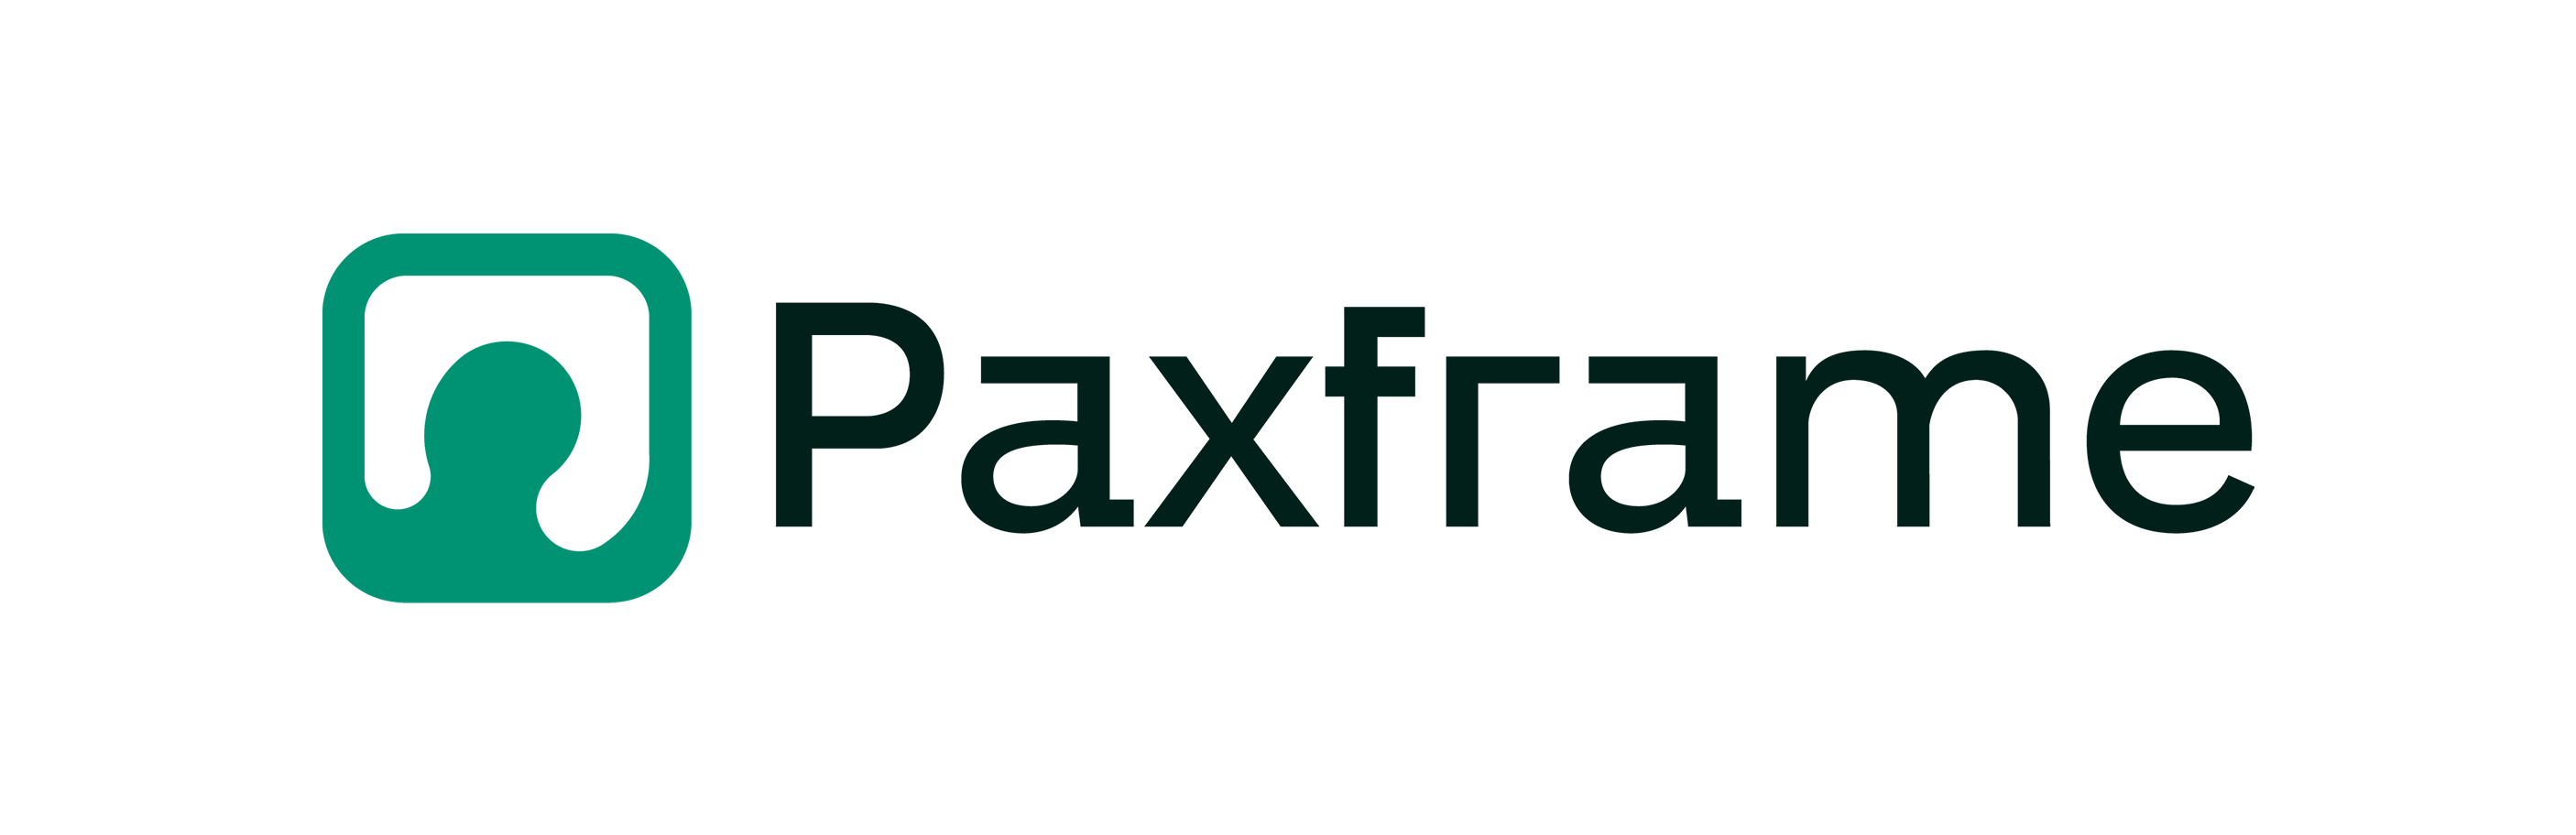 Paxframe